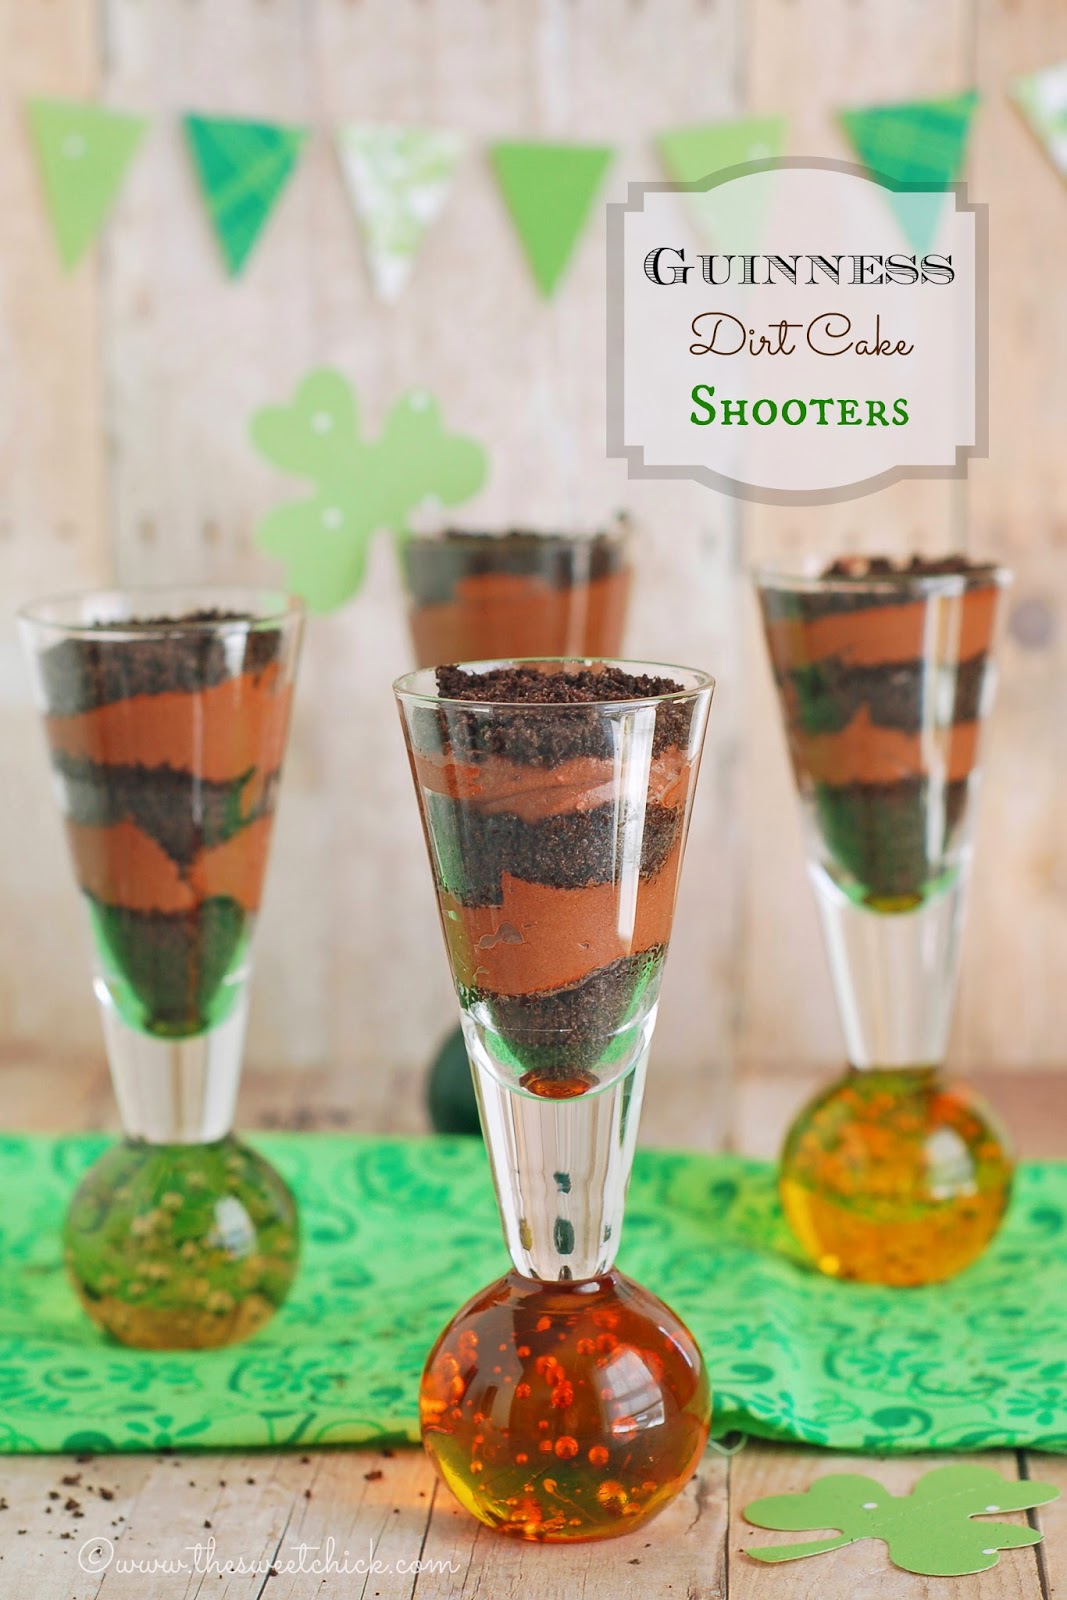 Guinness Dirt Cake Shooters by The Sweet Chick